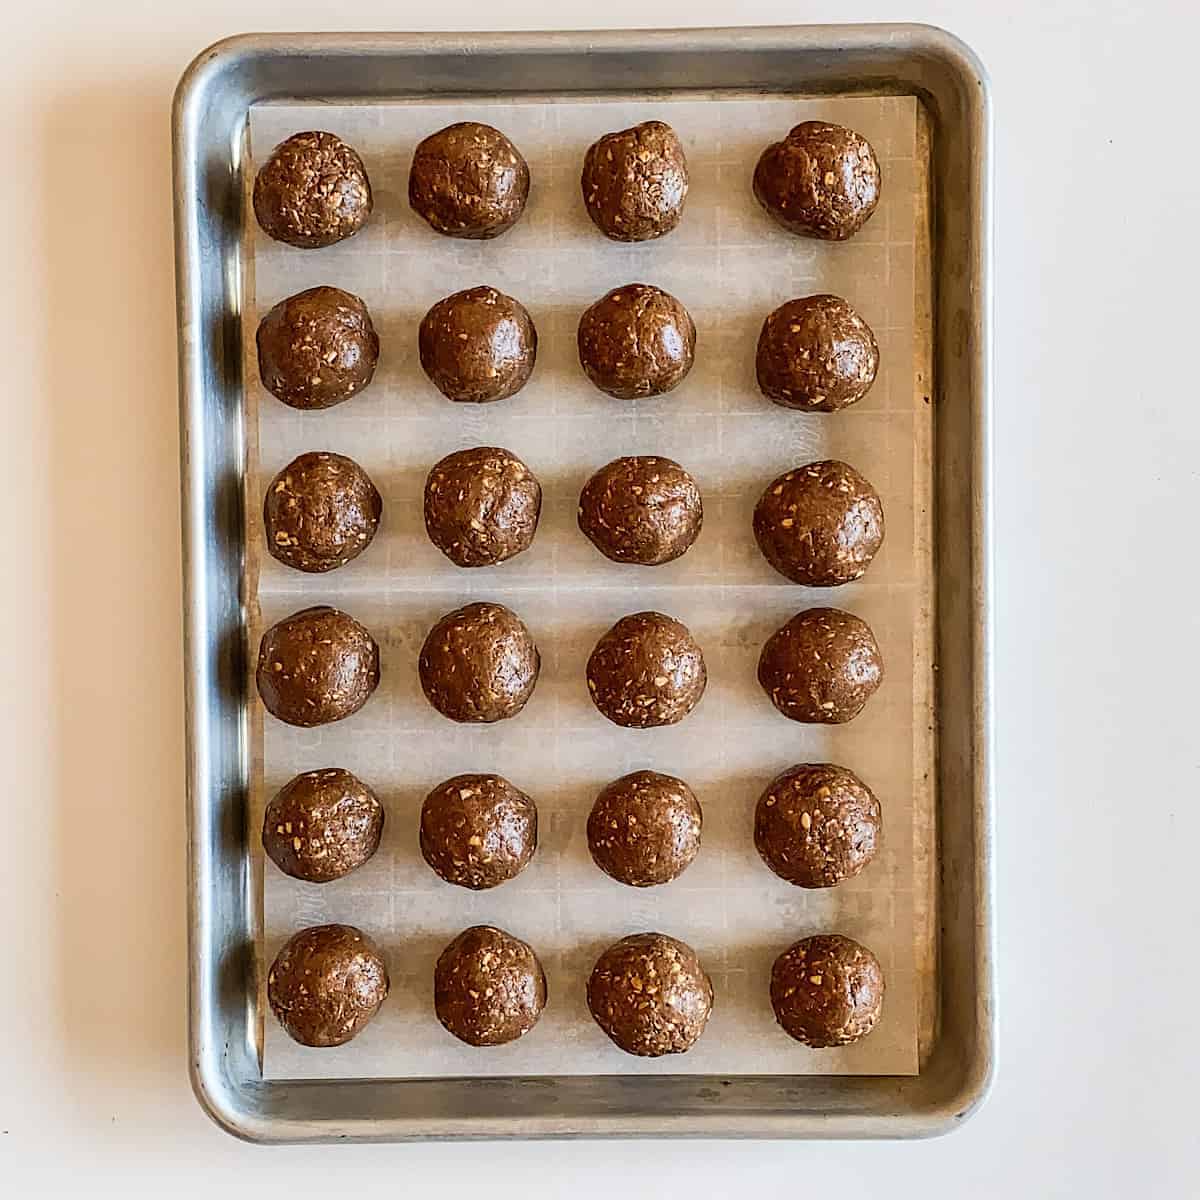 Bite sized balls drizzled with chocolate with chocolate chips sprinkled on white plate on light blue linen napkin.